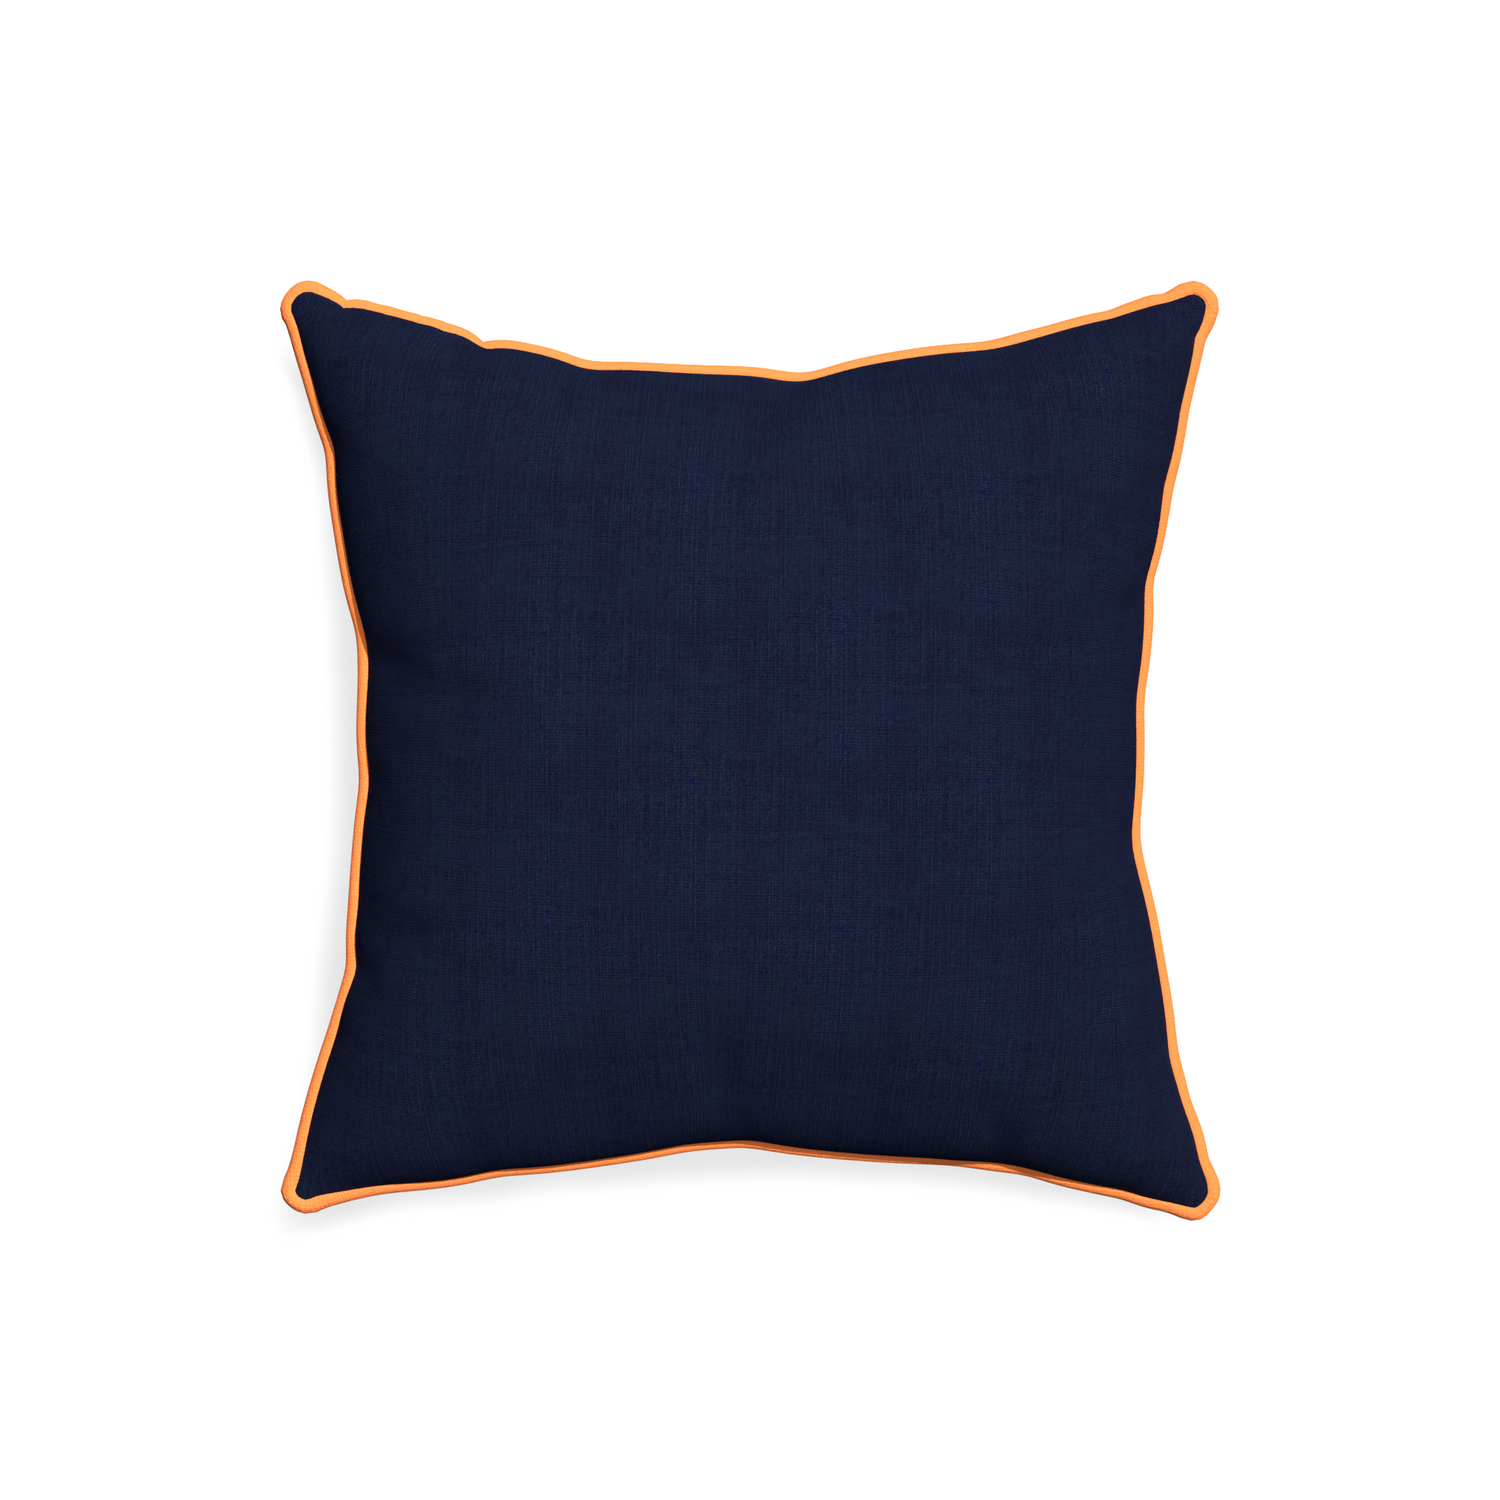 20-square midnight custom pillow with clementine piping on white background